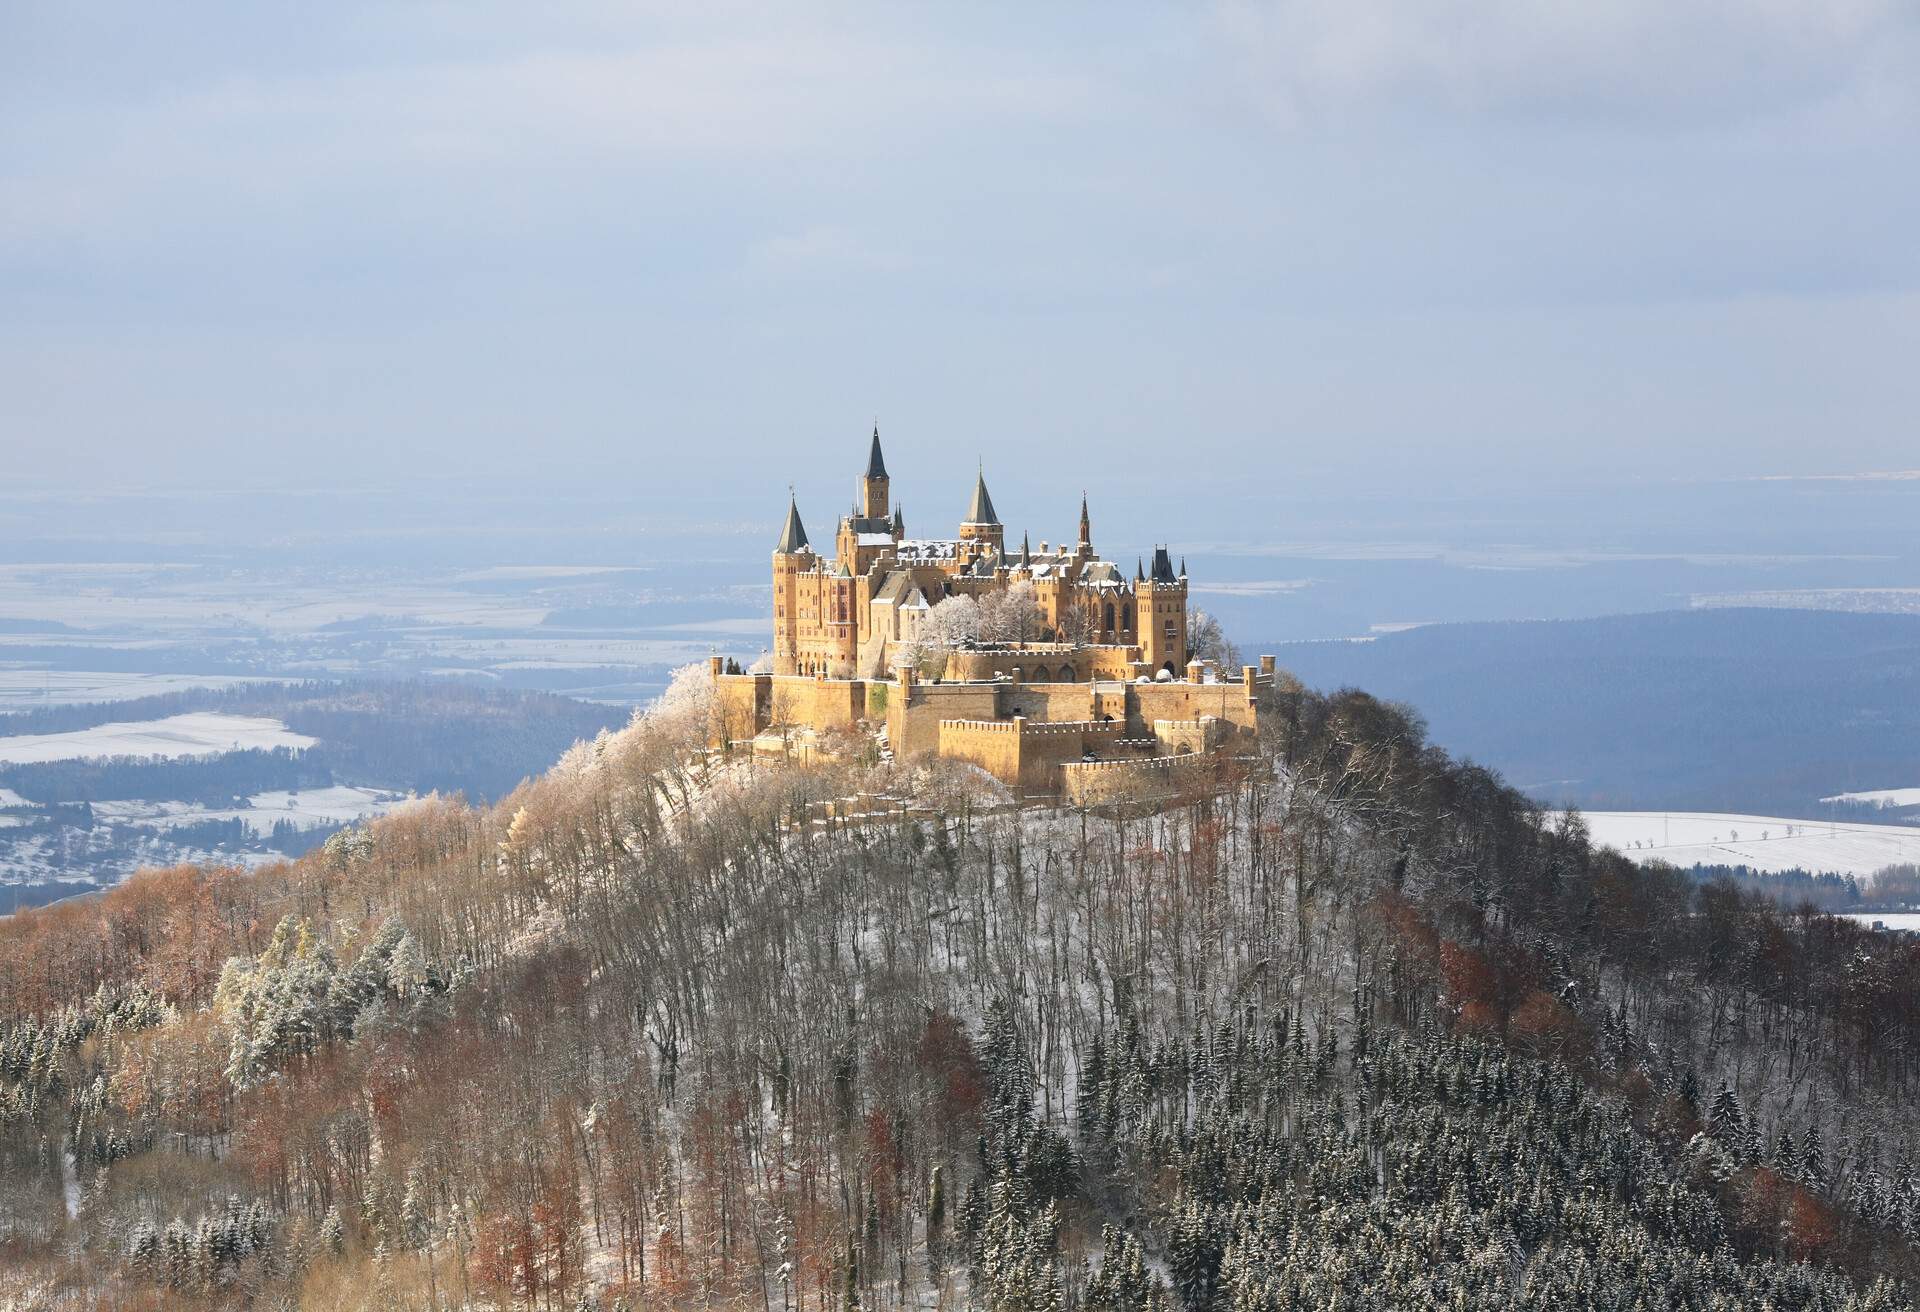 DEST_GERMANY_CASTLE_HOHENZOLLERN_GettyImages-91604607